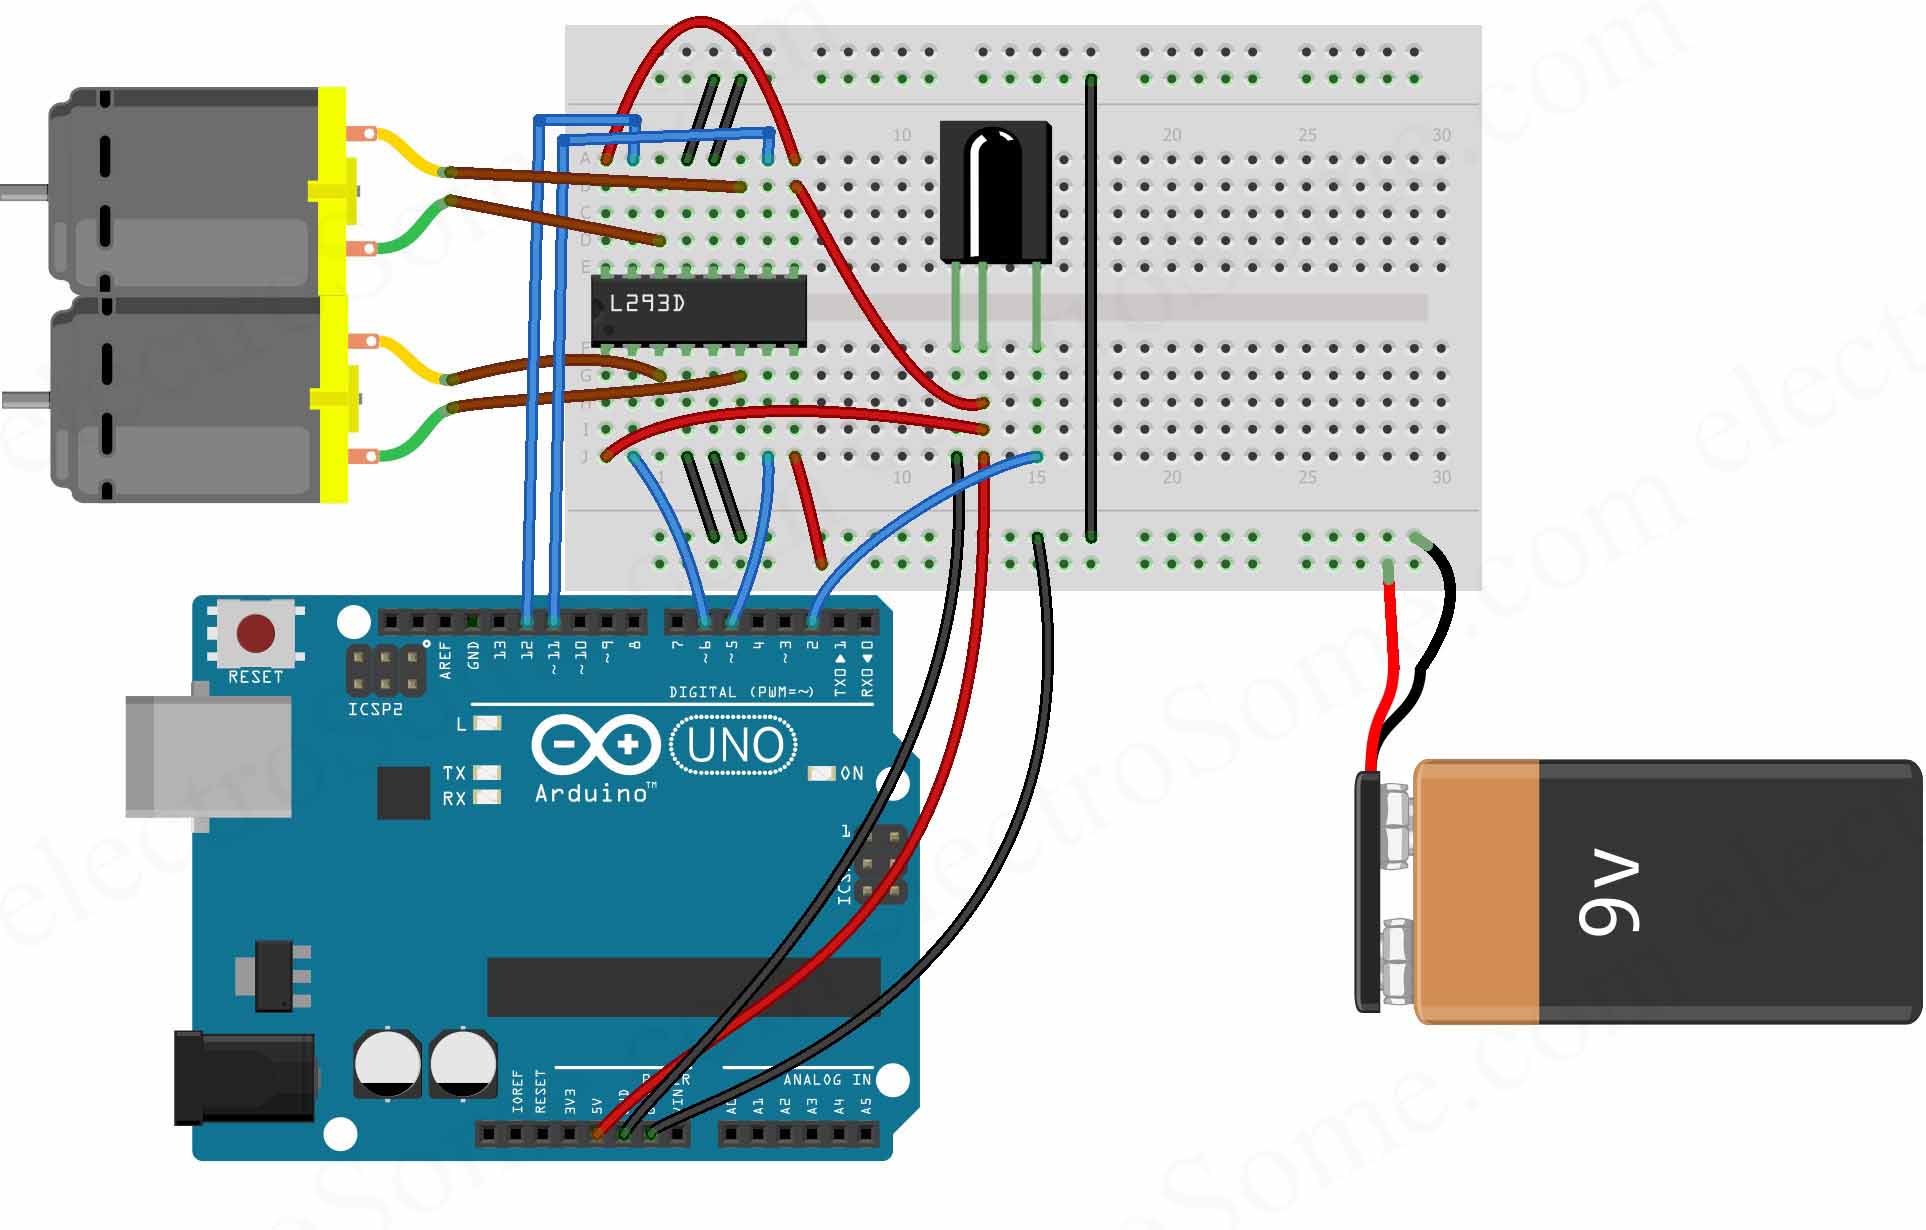 Use Arduino to Interface with a Remote Controlled Power Switch